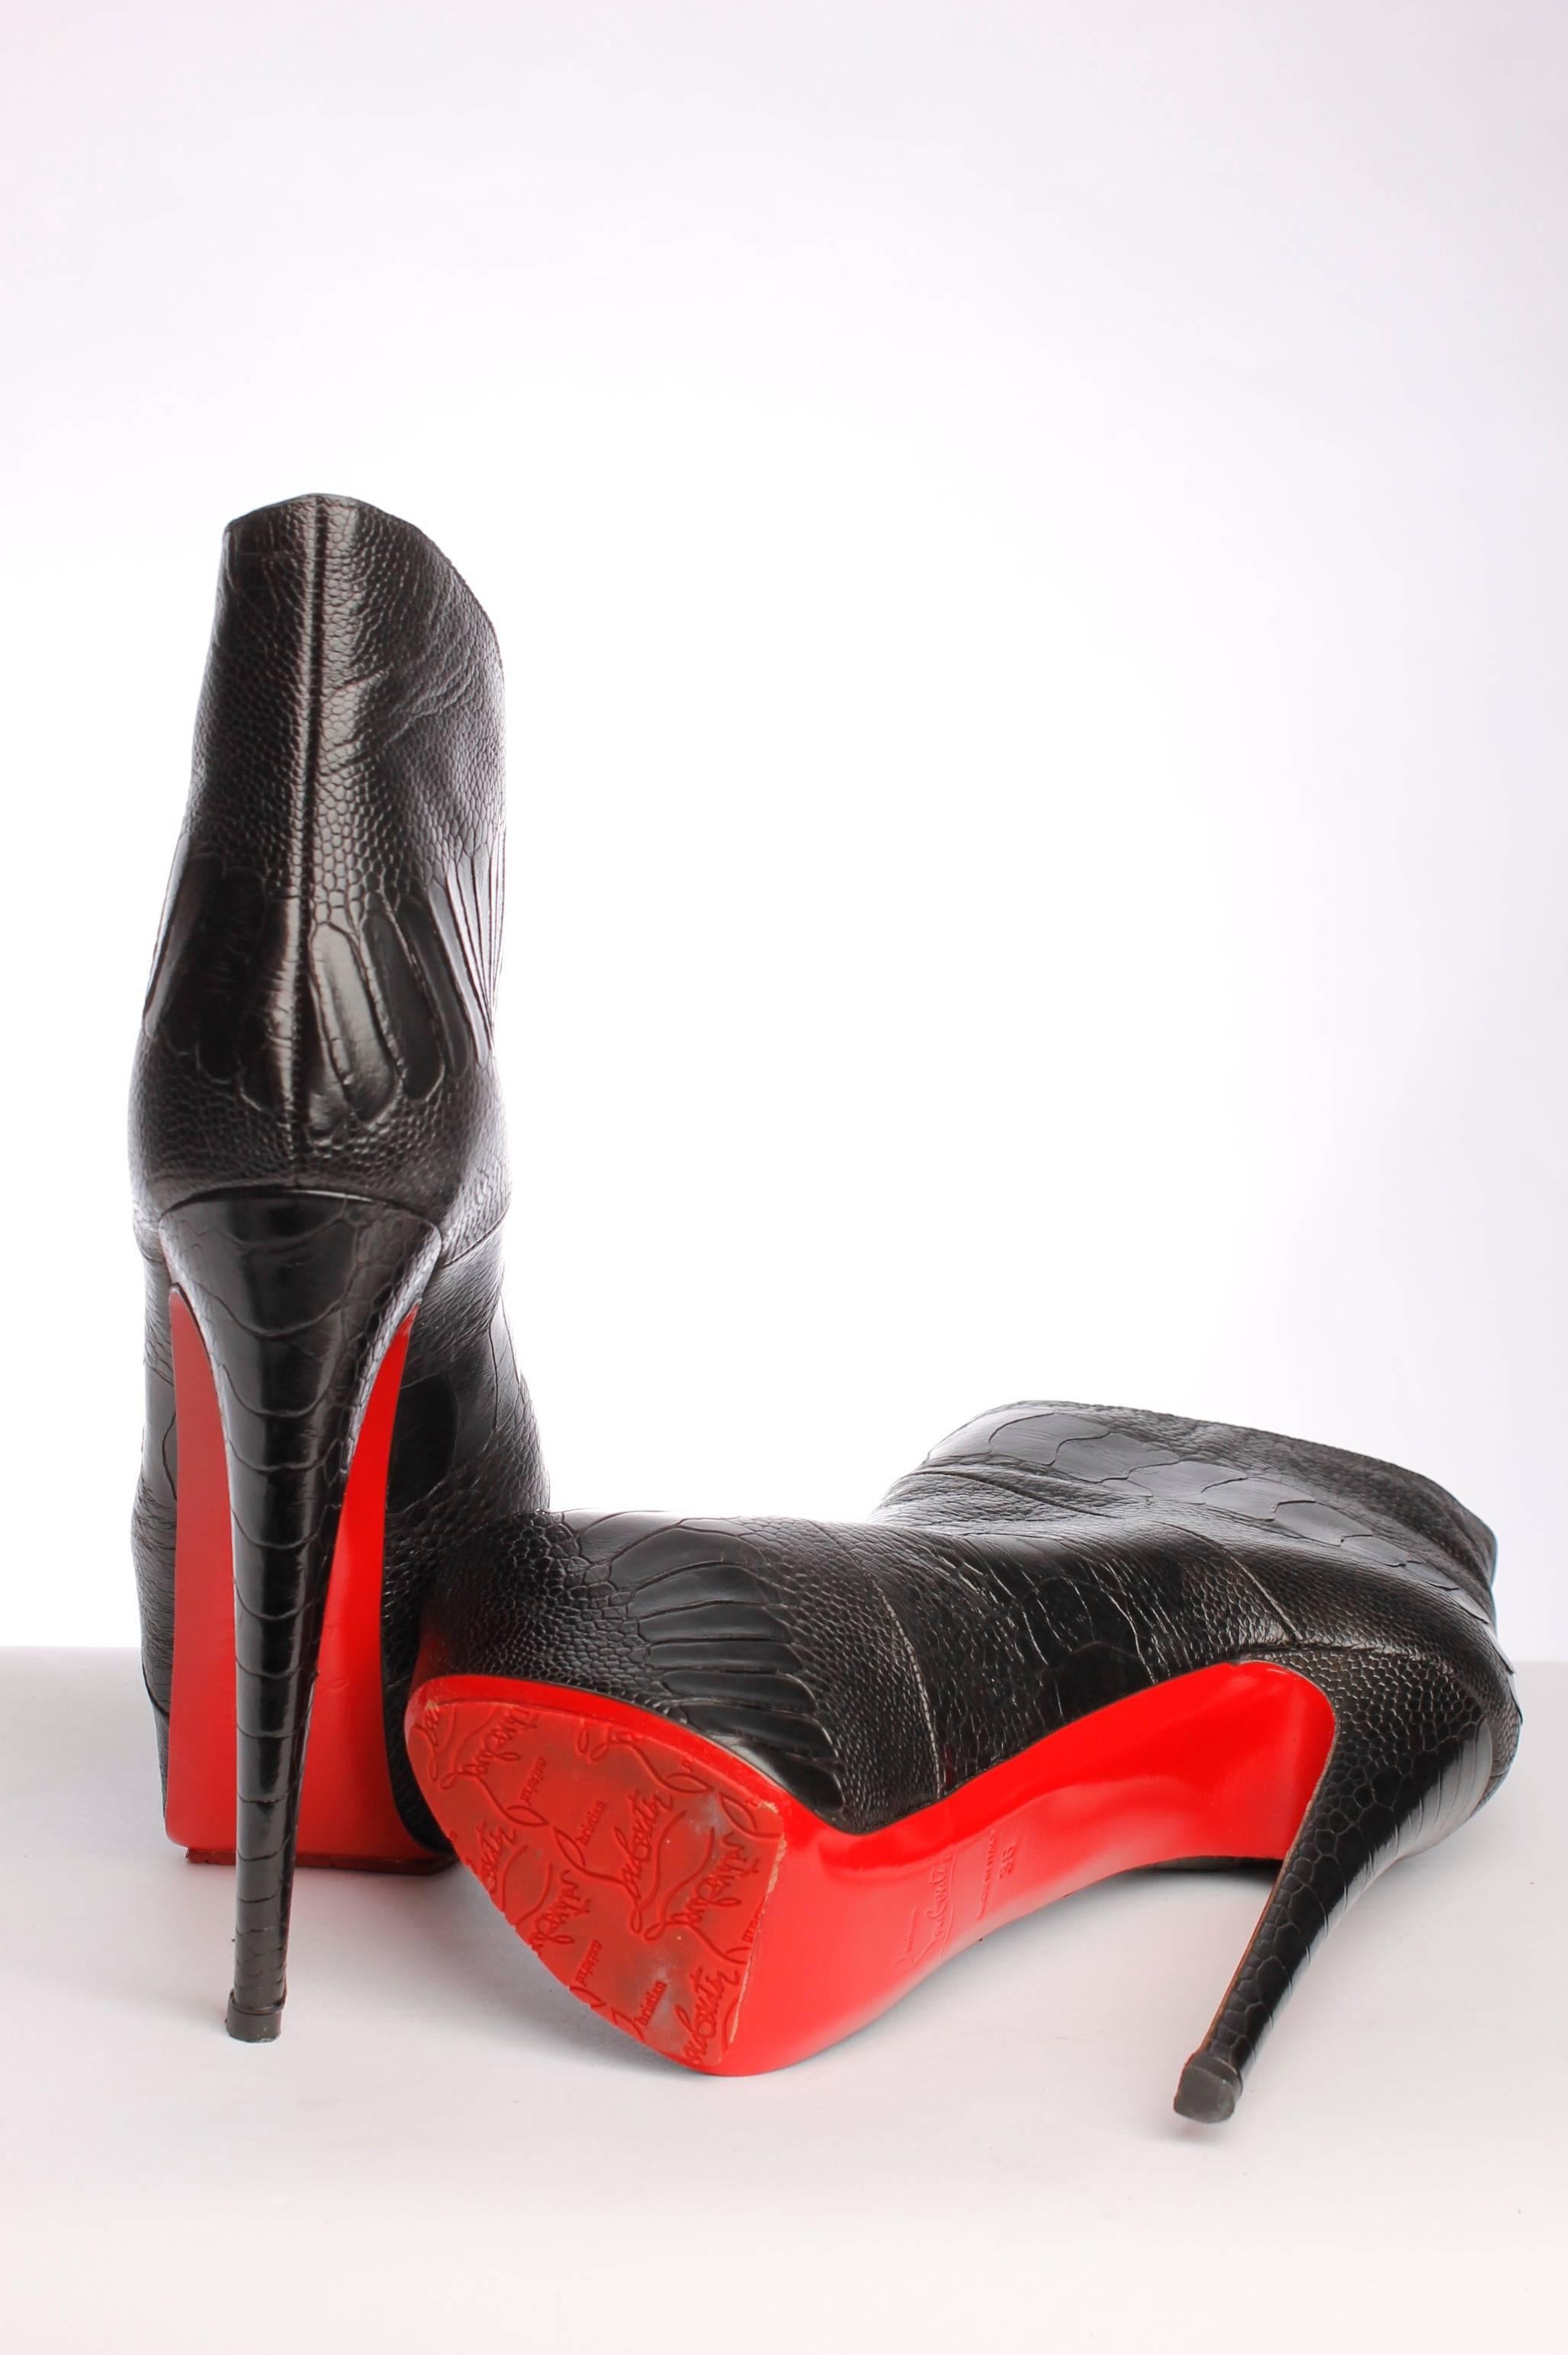  

Really high Christian Louboutin ankle boots in black croco-printed leather.

These boots are fully made of black croco leather with a little peep-toe. No zipper or other closure, easy to put on. The red sole is in good condition, a little